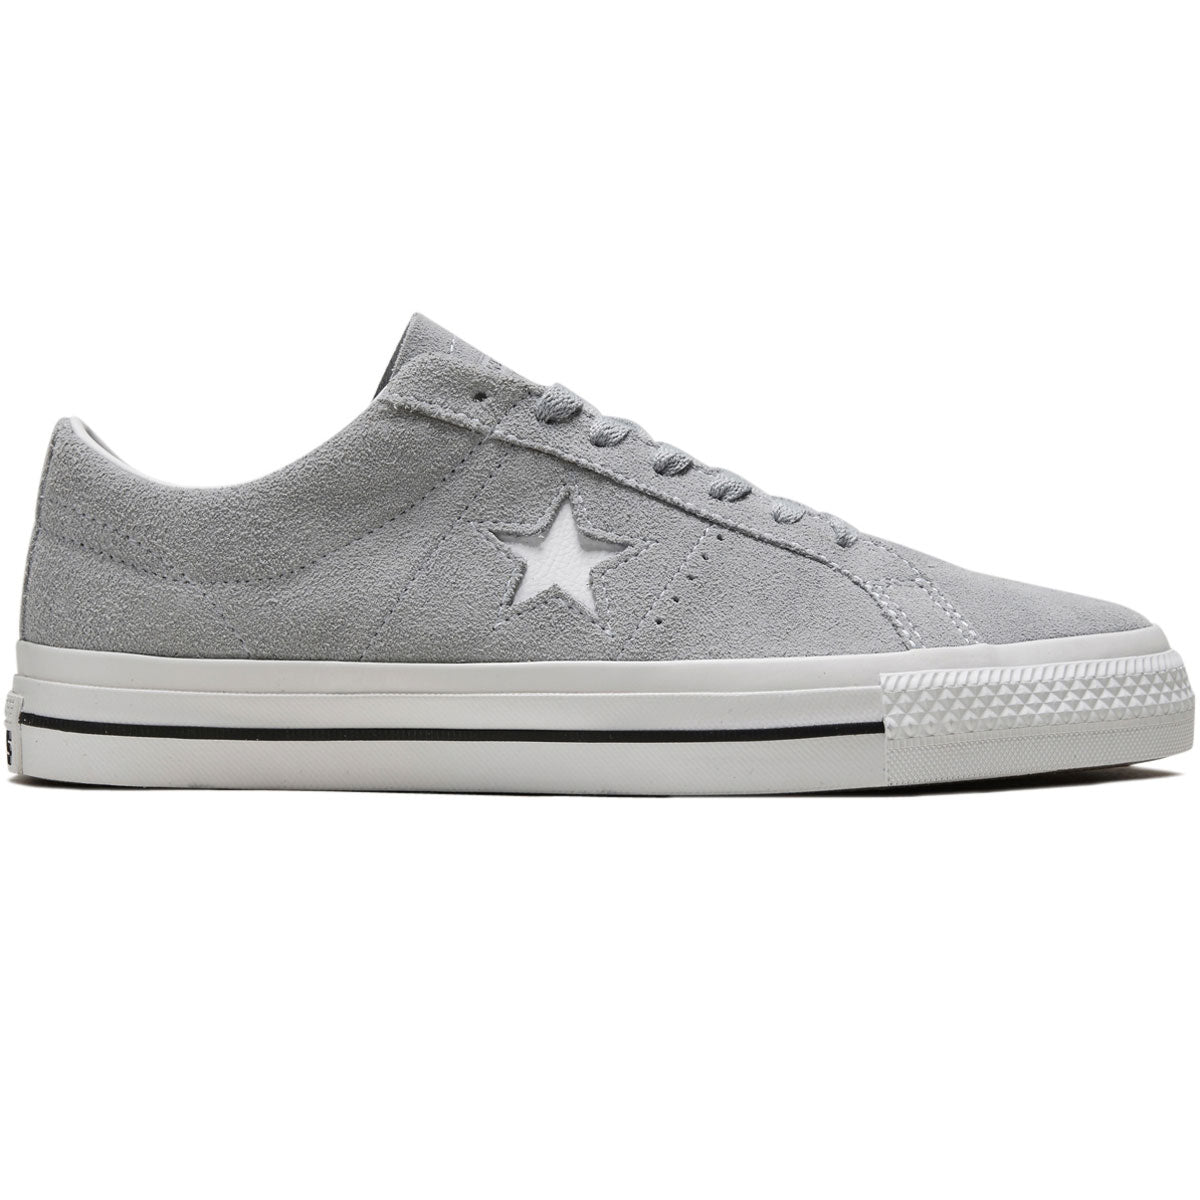 Converse One Star Pro Shoes - Wolf Grey/White/Black